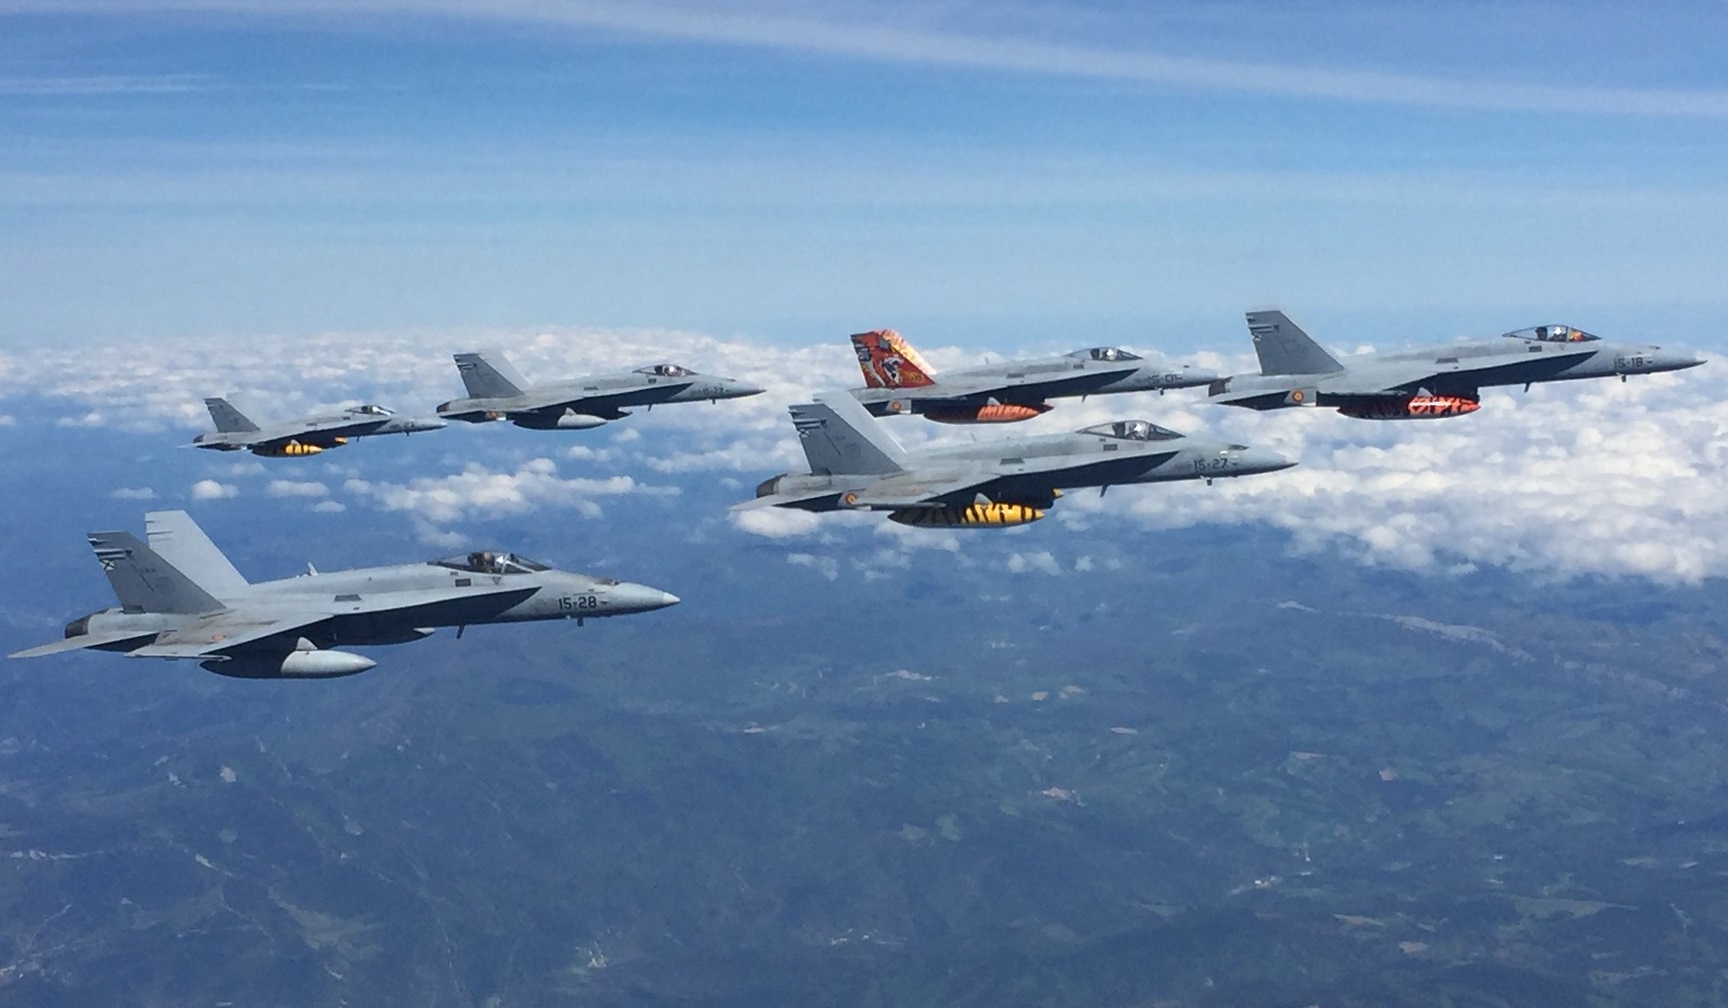 Spanish Air Force EF-18A Hornet air superiority fighters